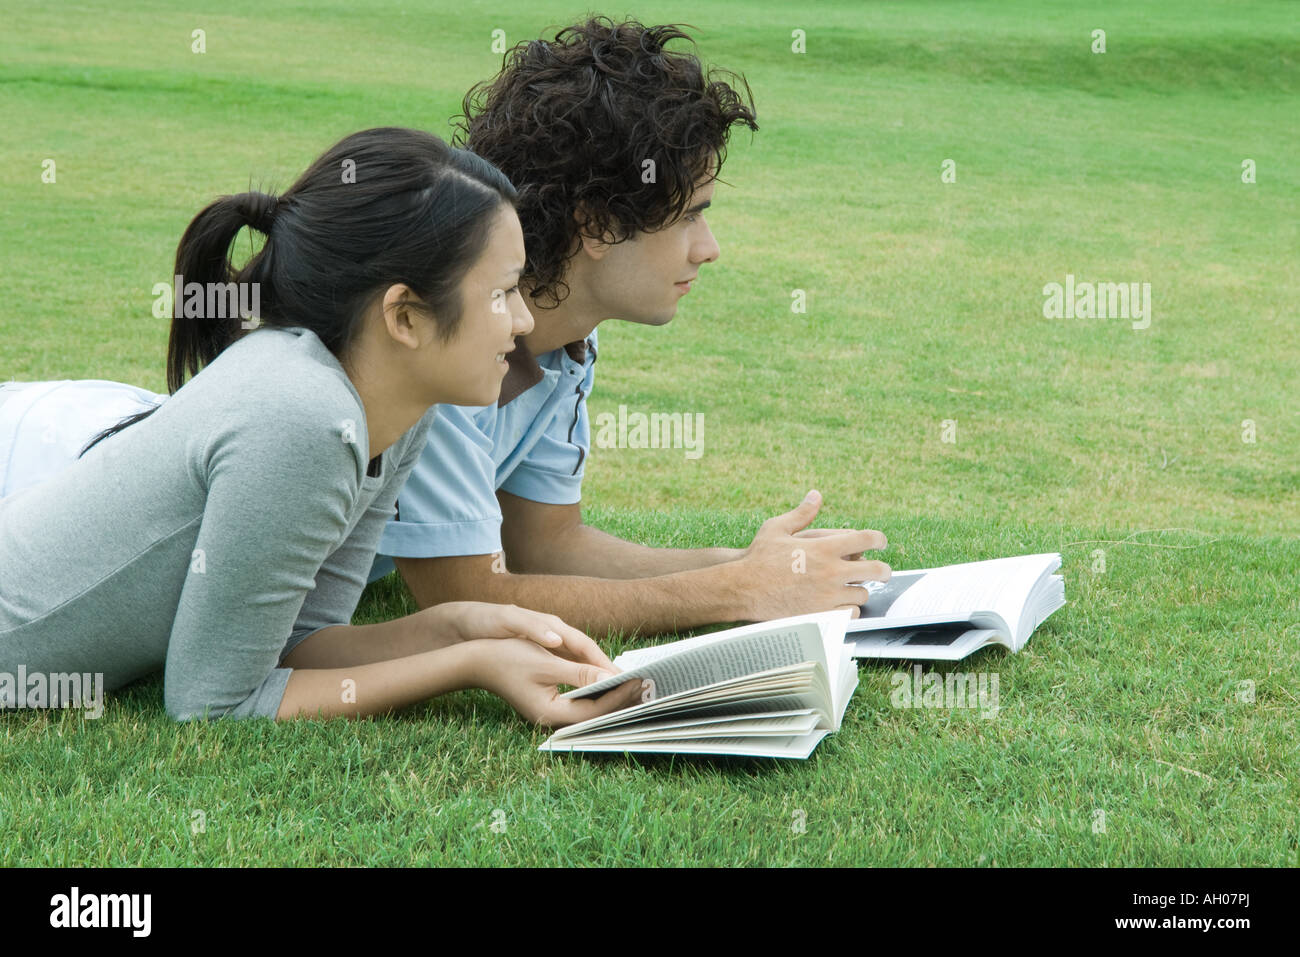 Young couple lying on grass with books, looking out of frame Stock Photo